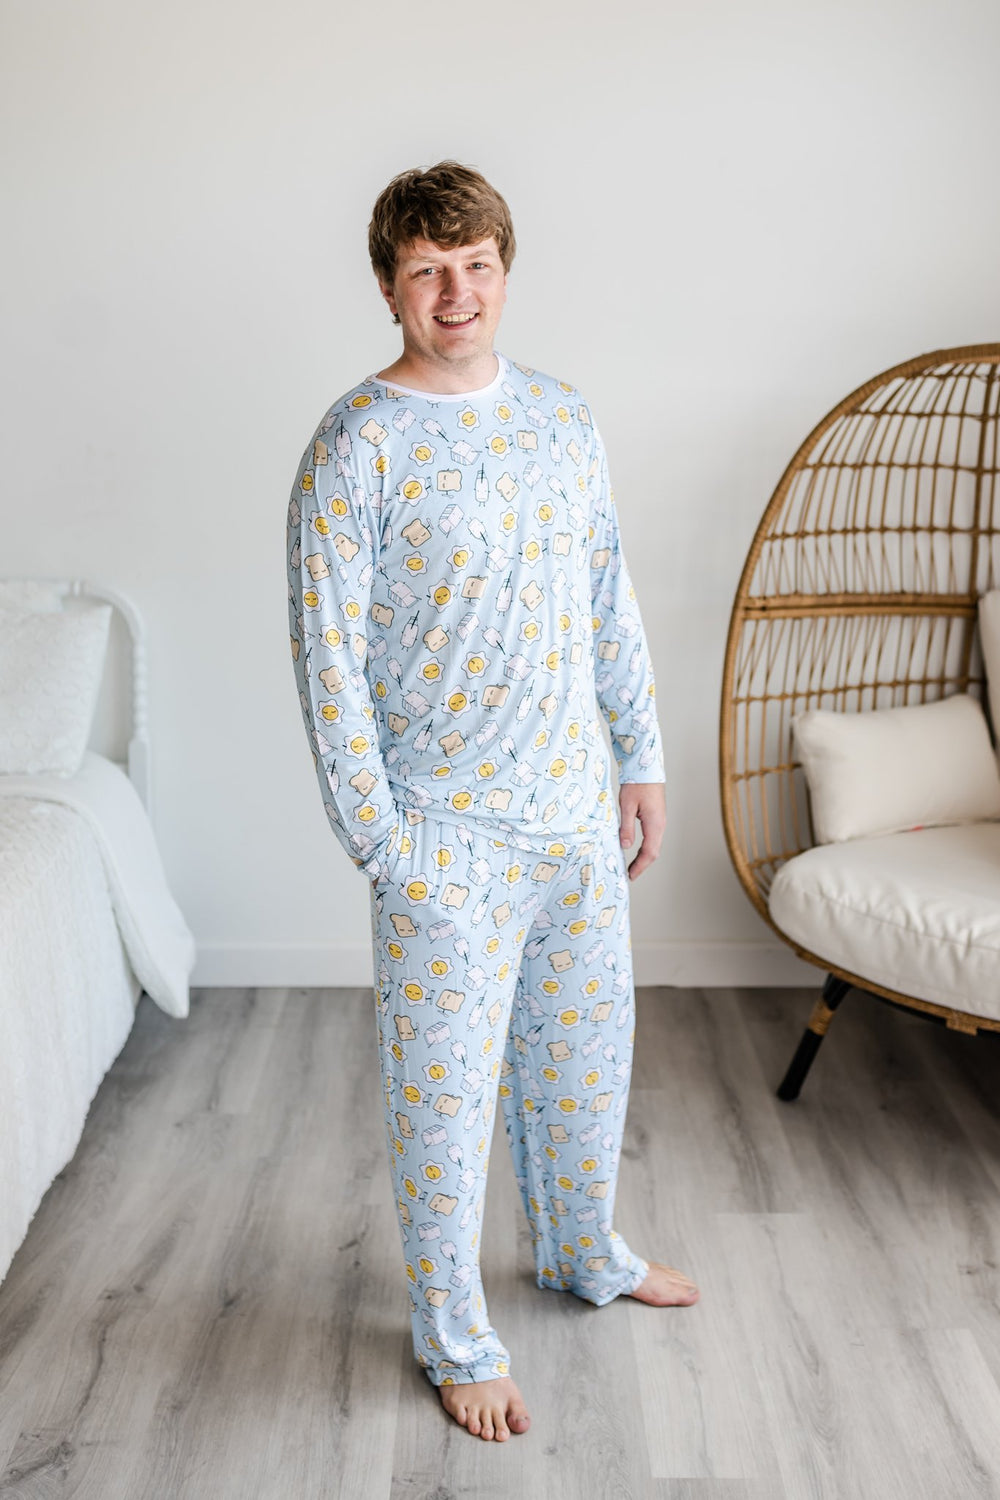 Image of male model wearing Blue Breakfast Buddies printed pajama pants with matching long sleeve pajama top. The breakfast foods featured on this print include sunny side up eggs, toast, and milk.